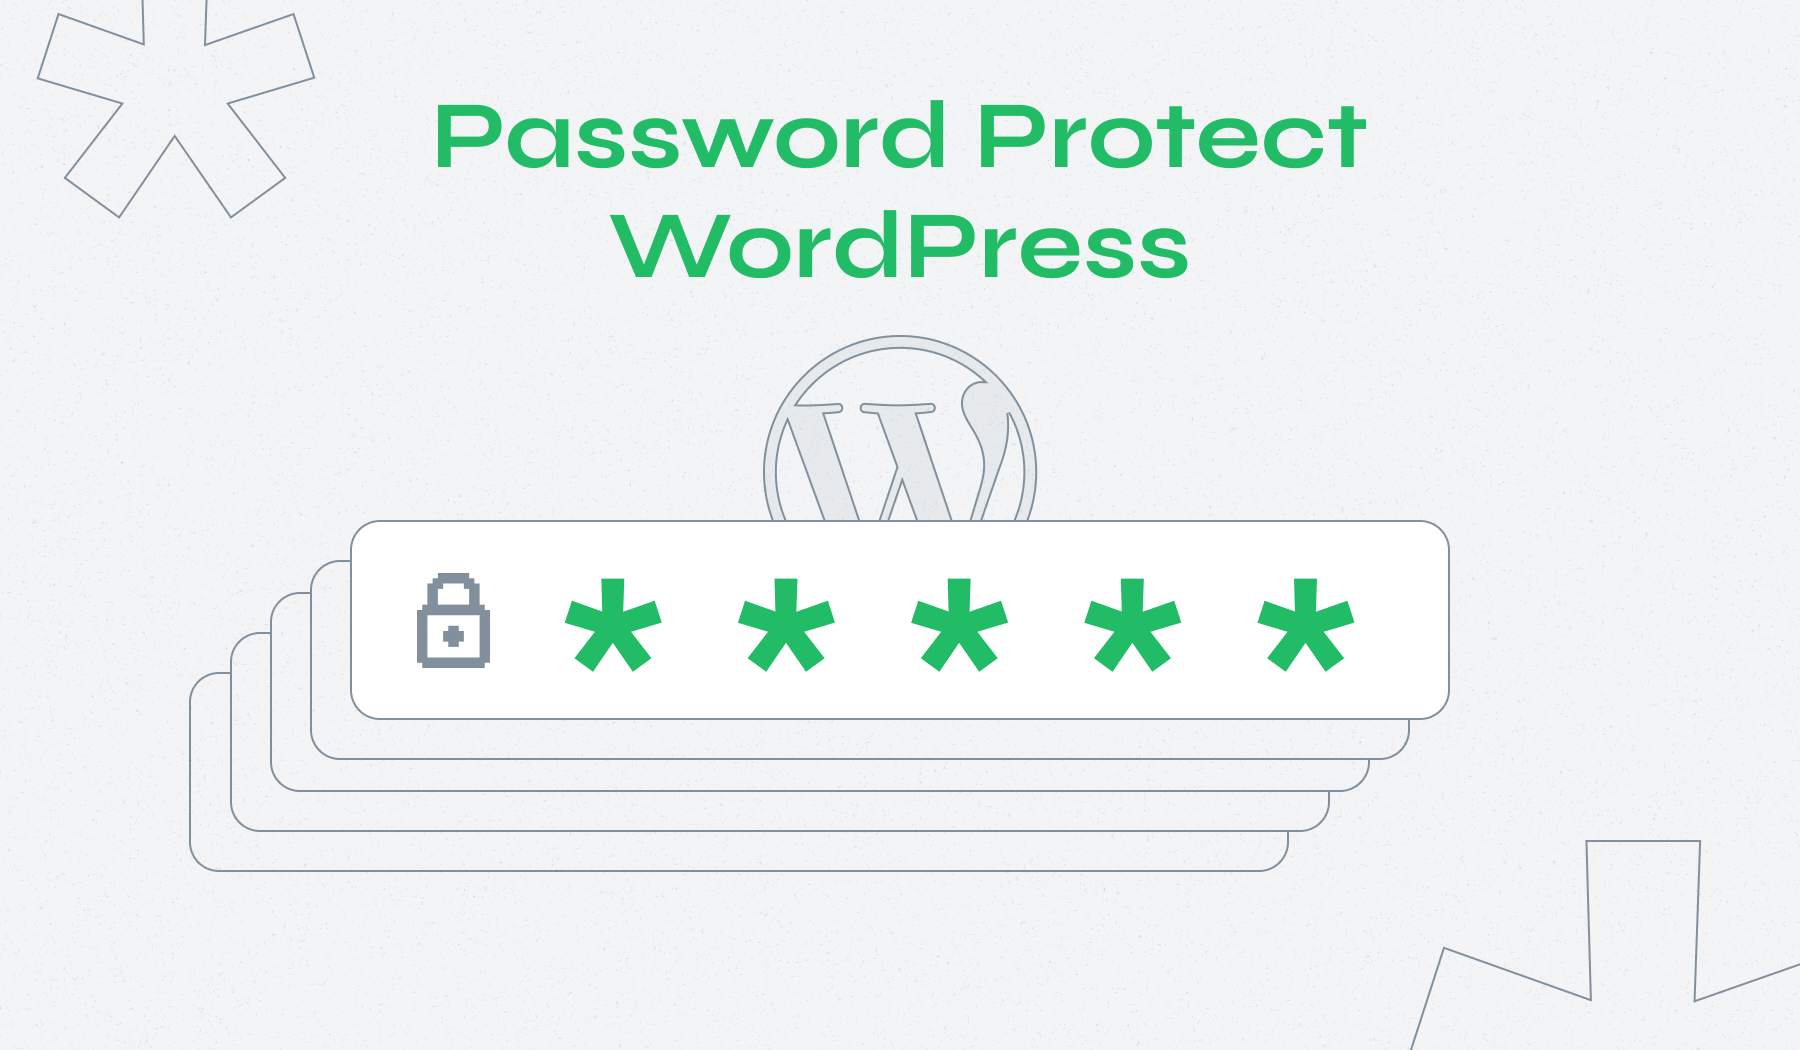 How to Password Protect a WordPress Site